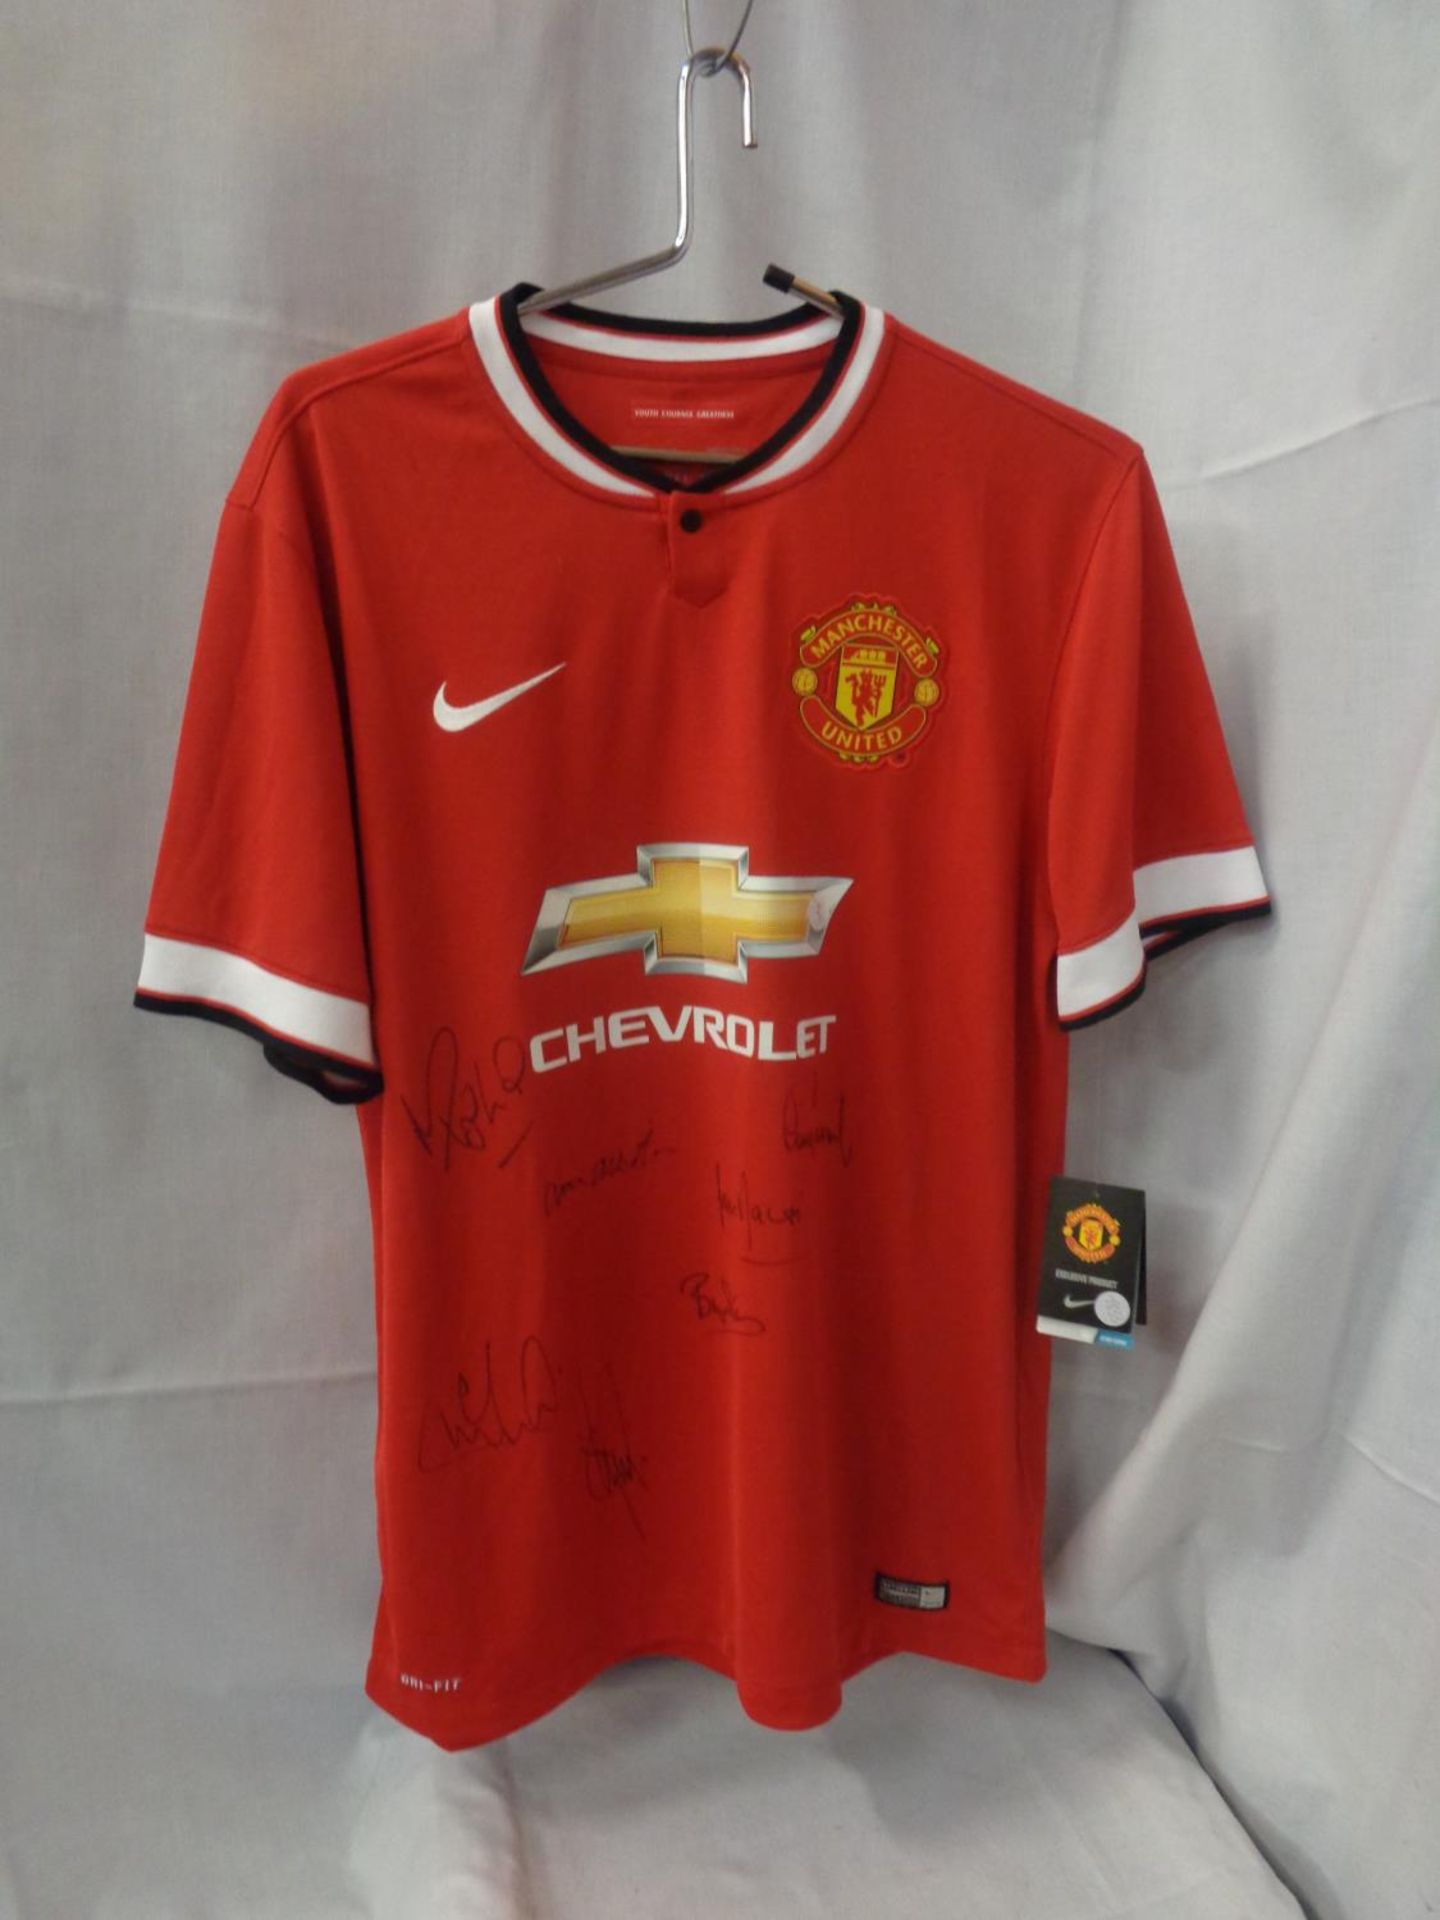 A SIGNED MANCHESTER UNITED SHIRT WITH SEVERAL SIGNITURES INCLUDING BRIAN ROBSON, ARTHUR ALBISTON ETC